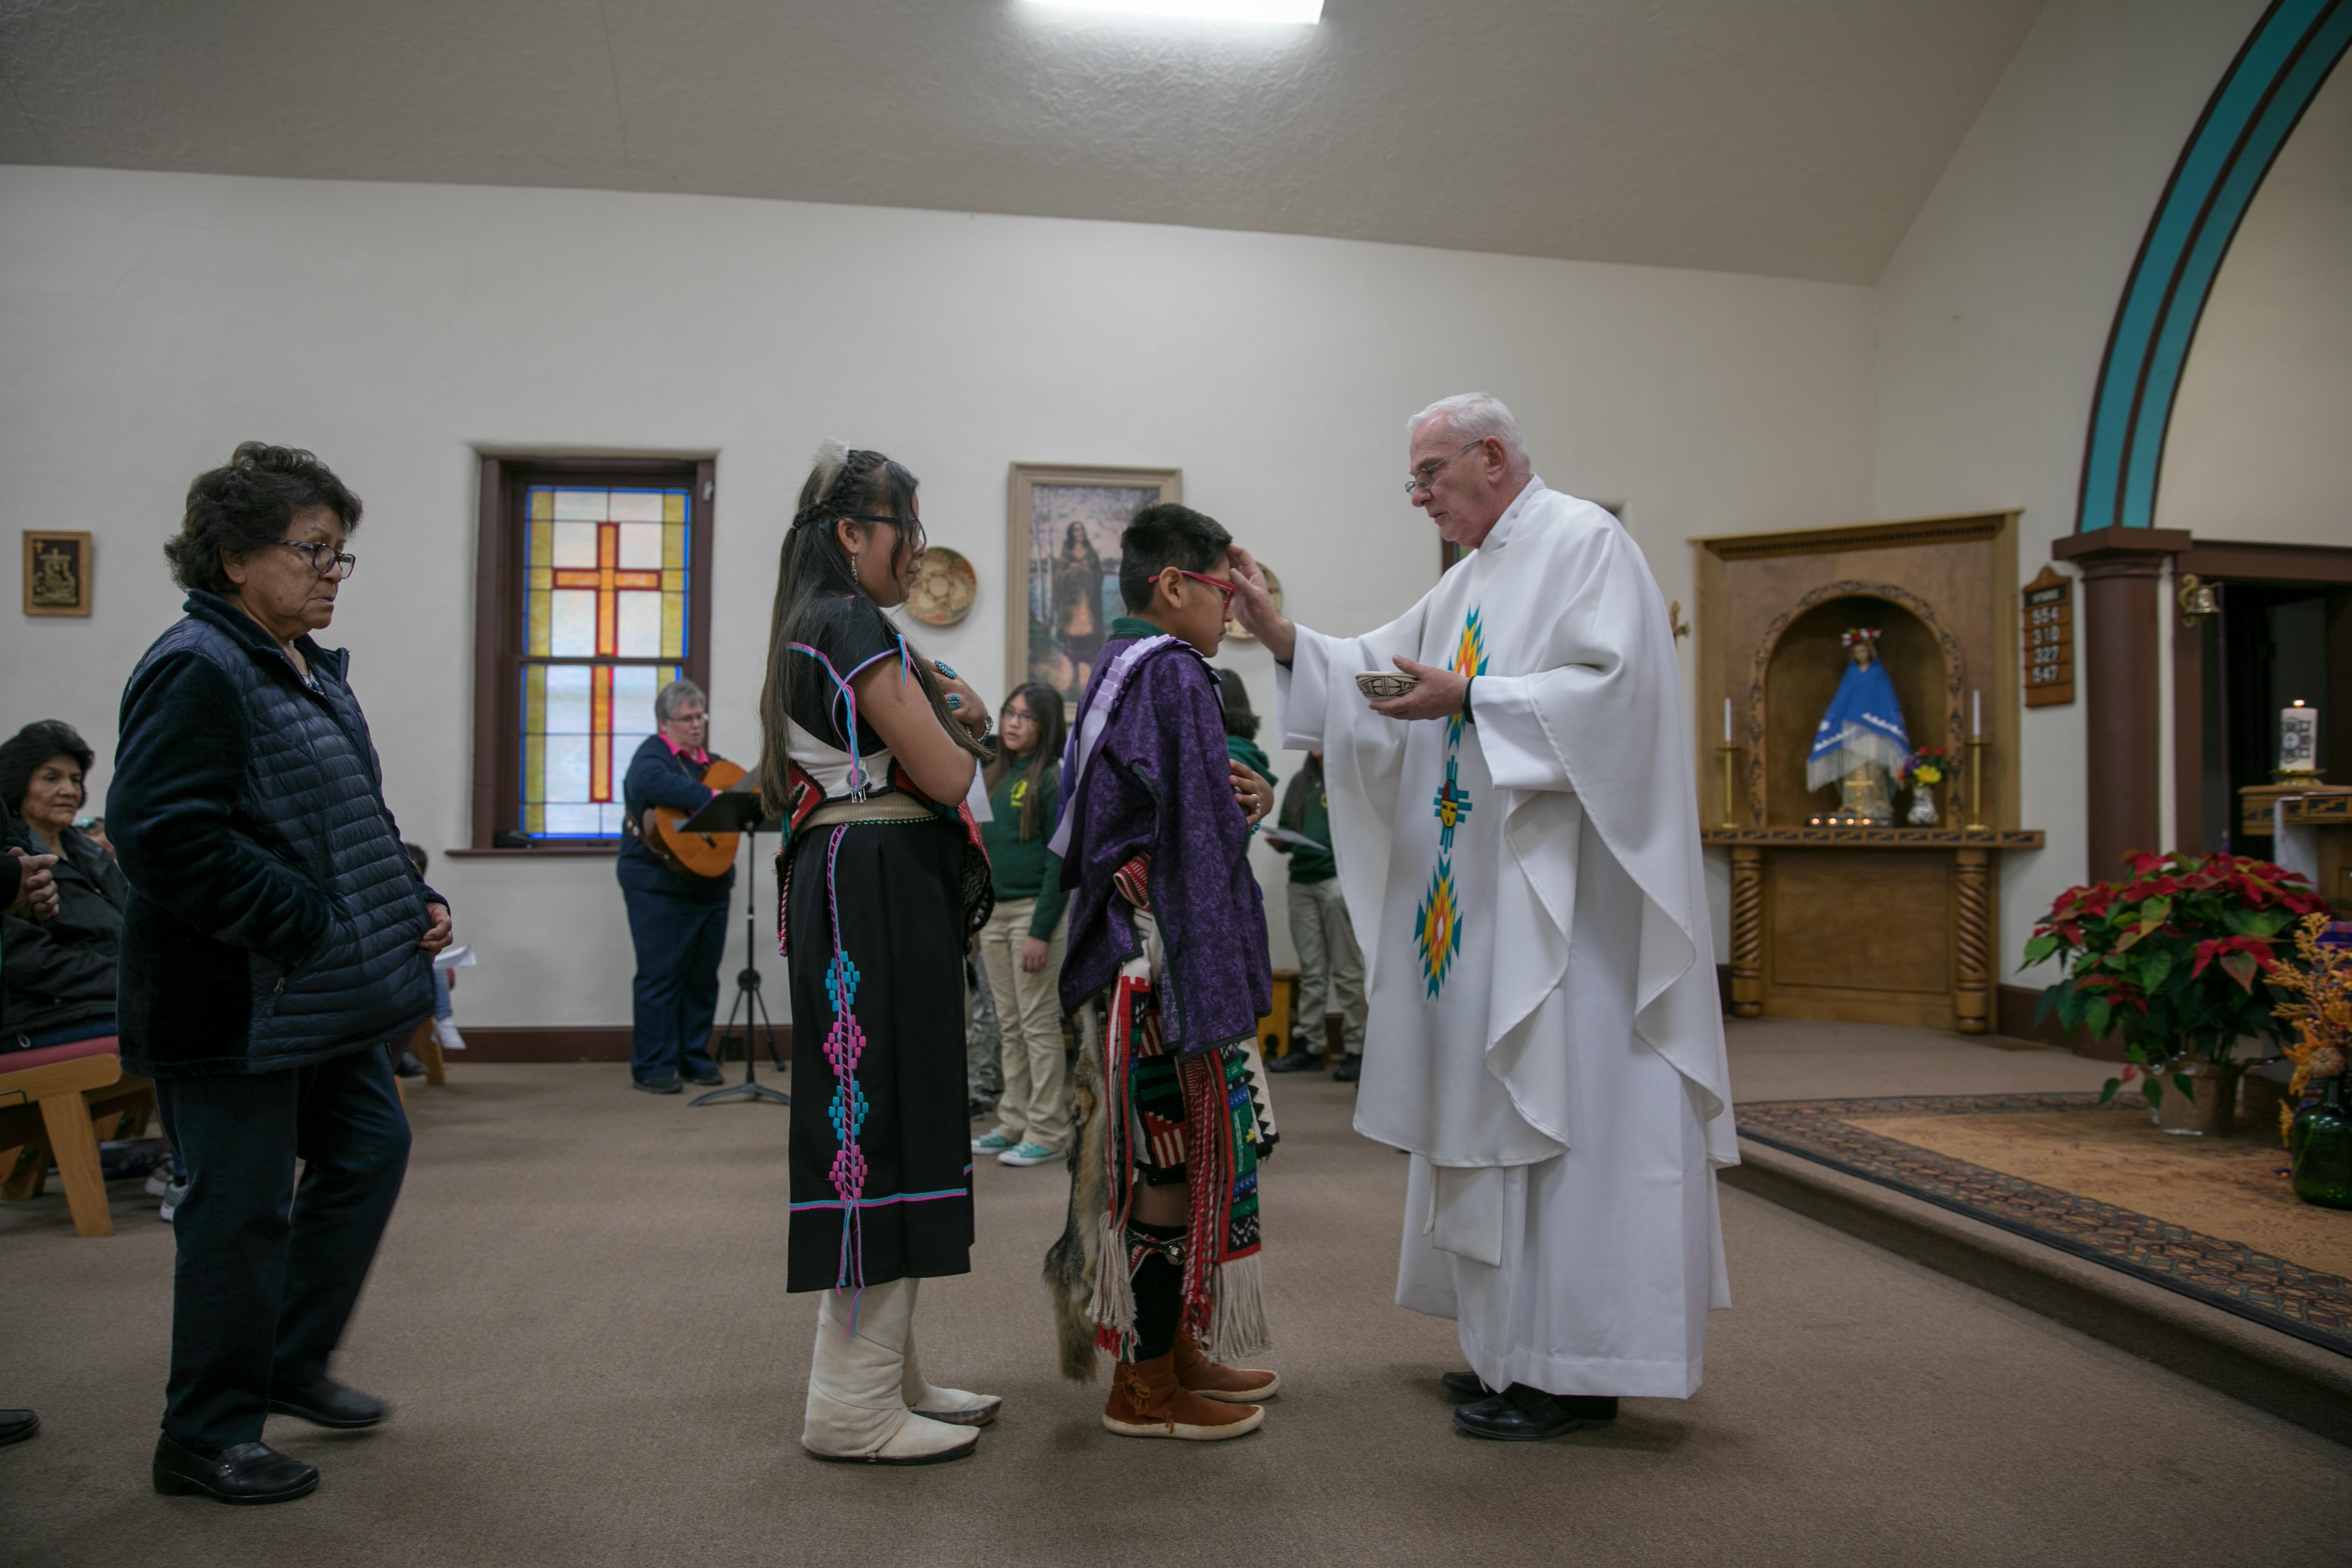 Wish 11: $125      Provides A Financial Stipend For A Dedicated Priest On The Navajo Reservation